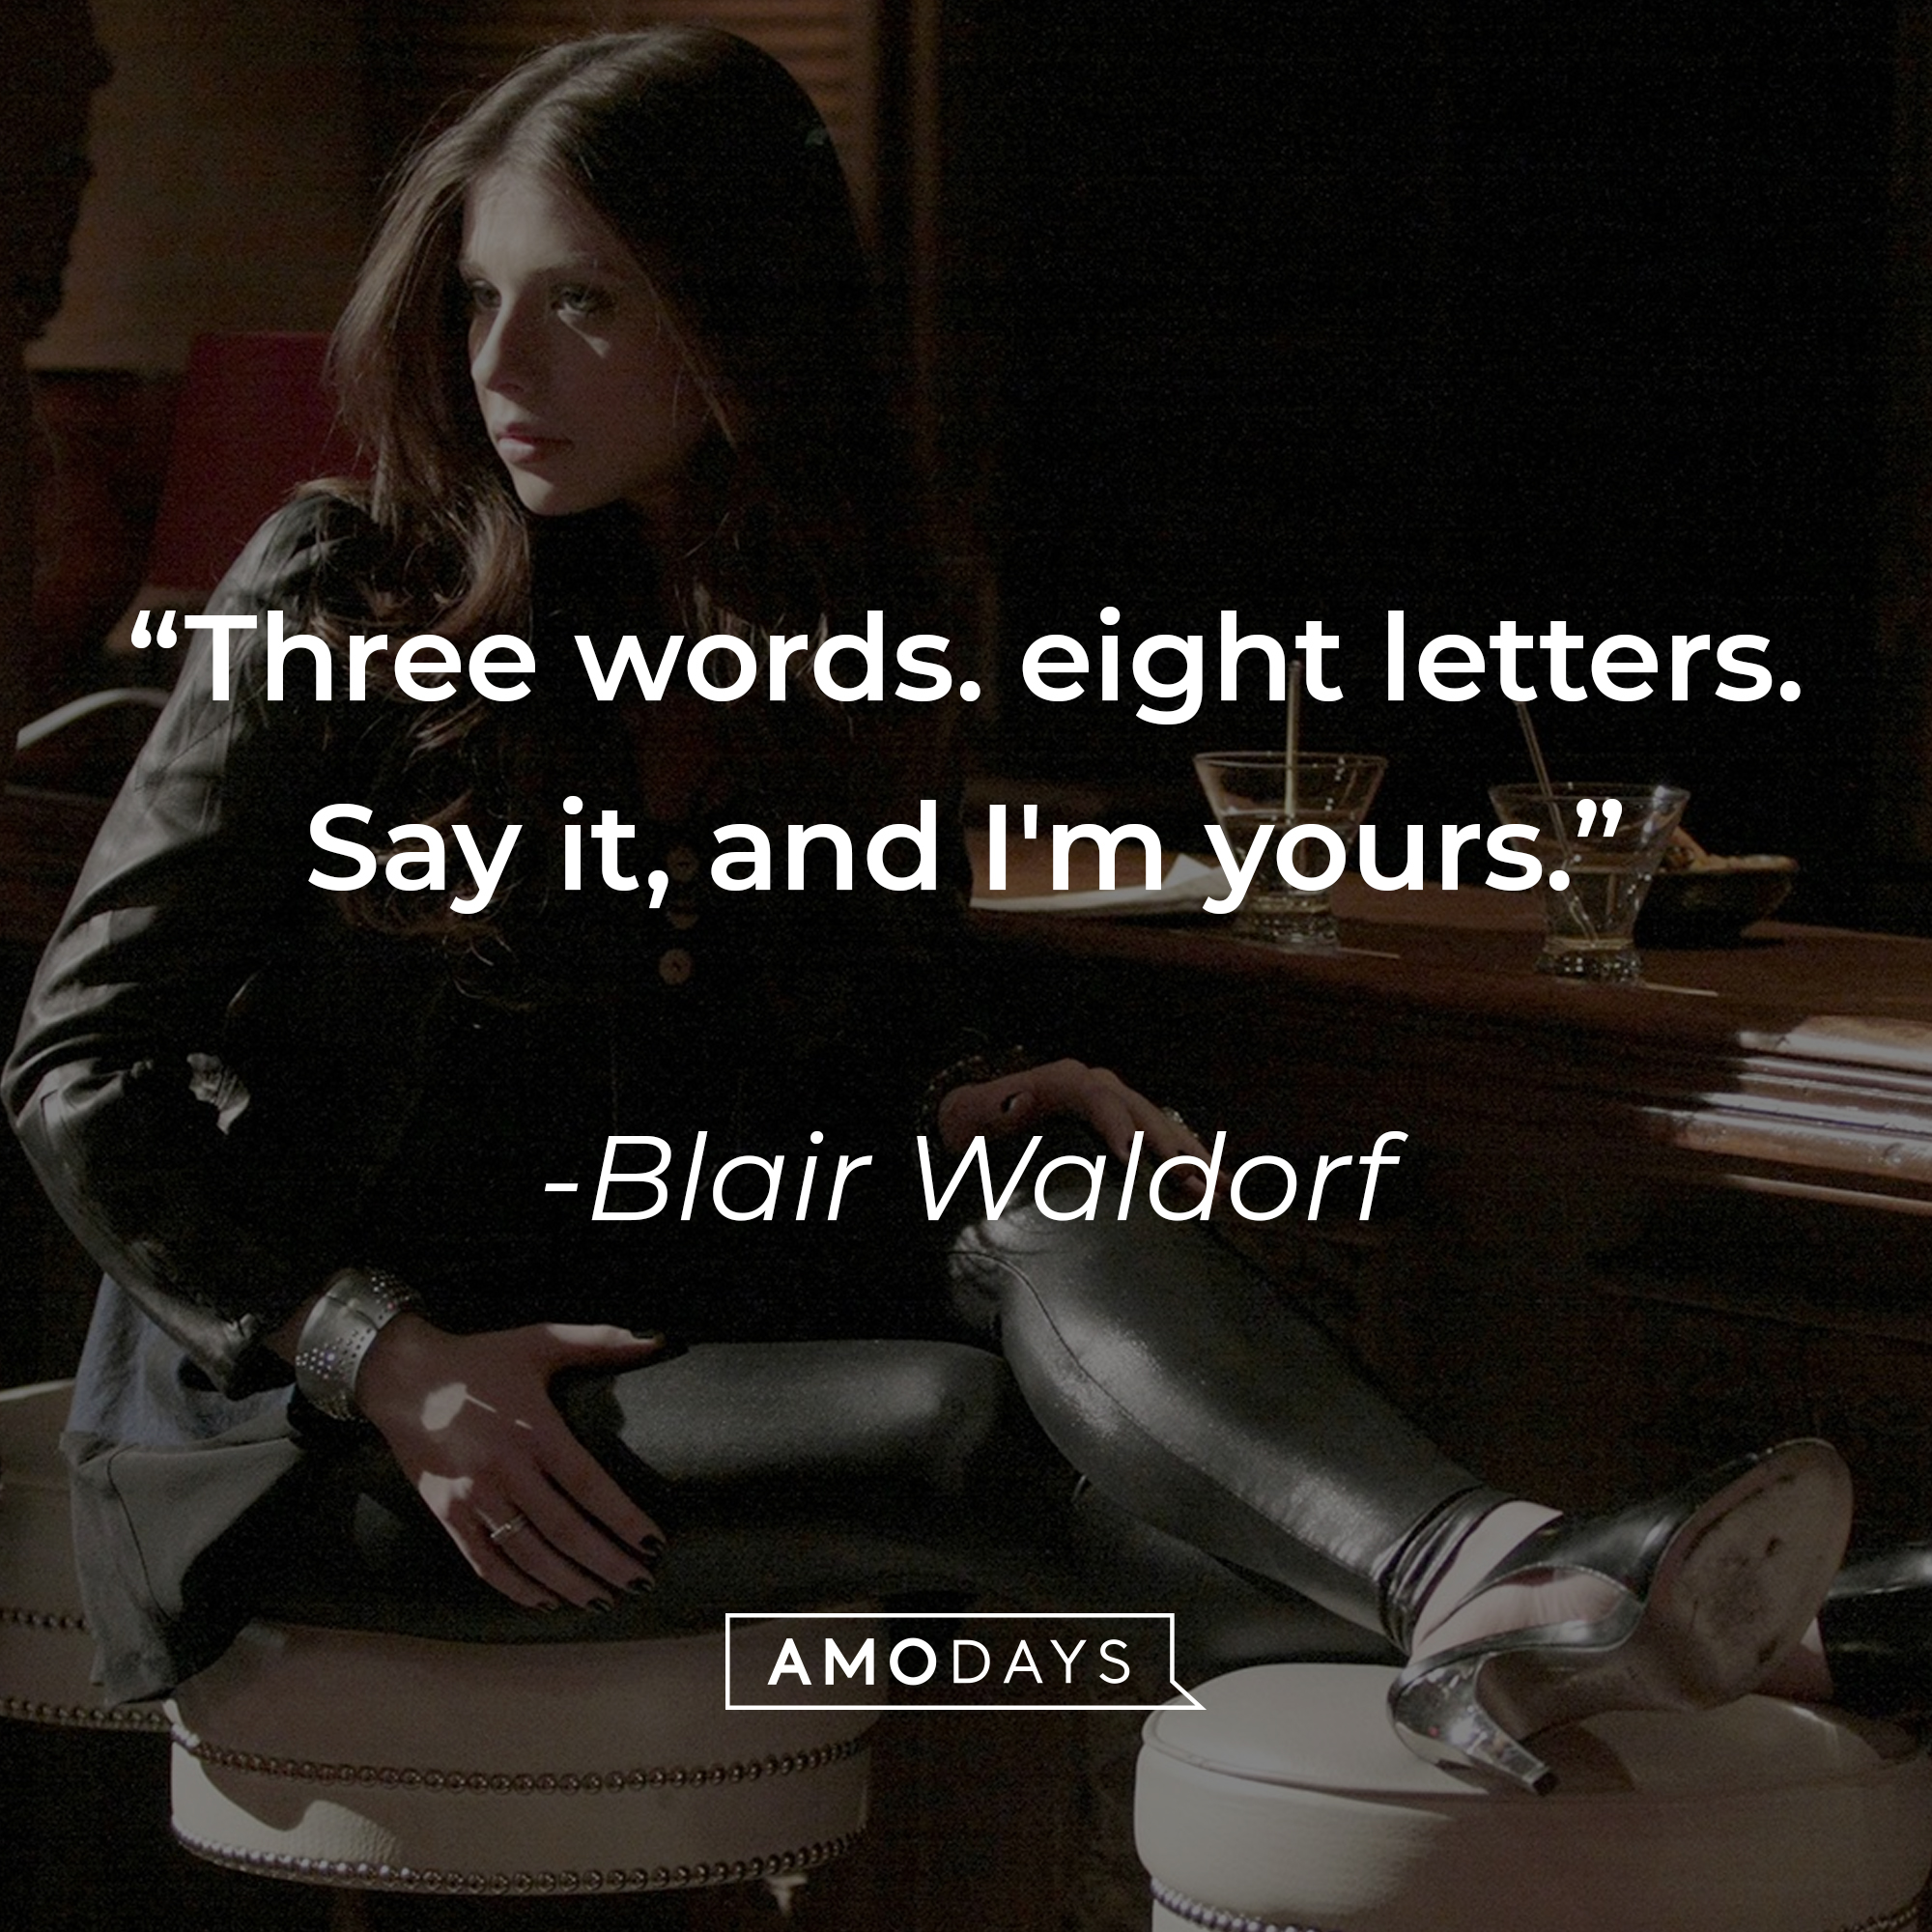 Image from "Gossip Girl" with Blair Waldrof's quote: "Three words. eight letters. Say it, and I'm yours." | Source: facebook.com/GossipGirl